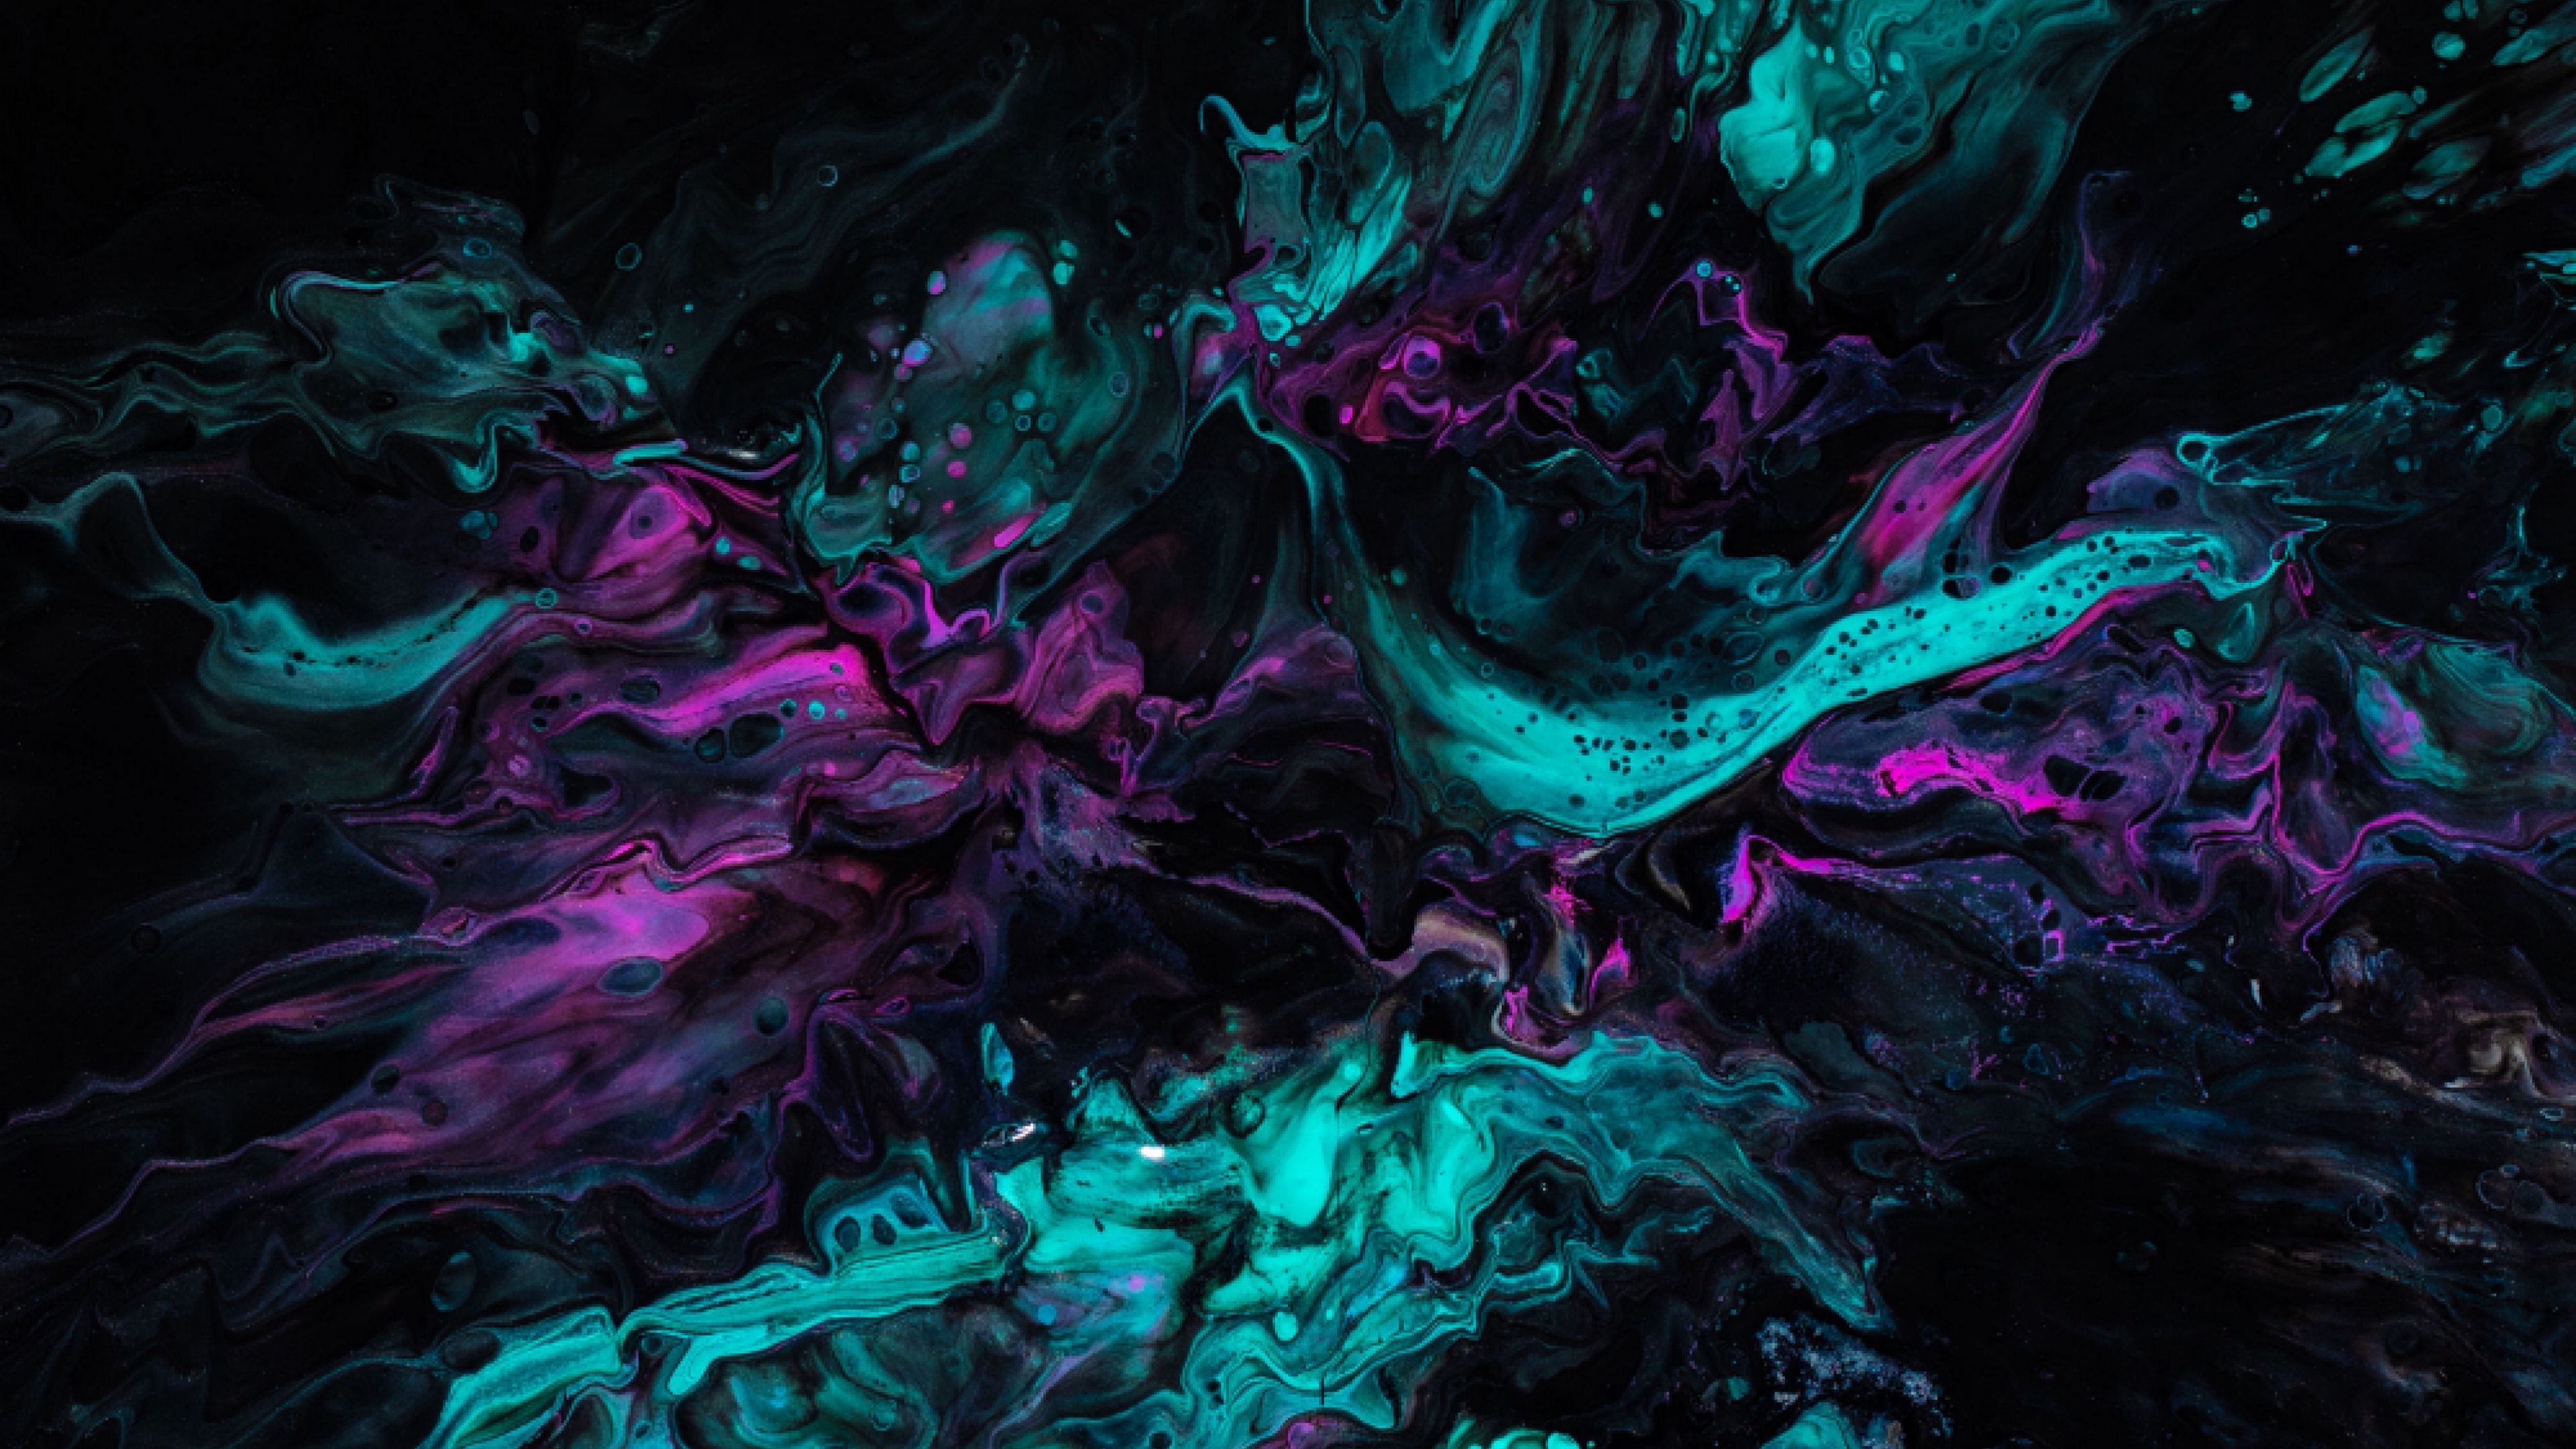 Download wallpaper 3840x2160 paint, stains, mixing, liquid, turquoise, purple, dark 4k uhd 16:9 HD background